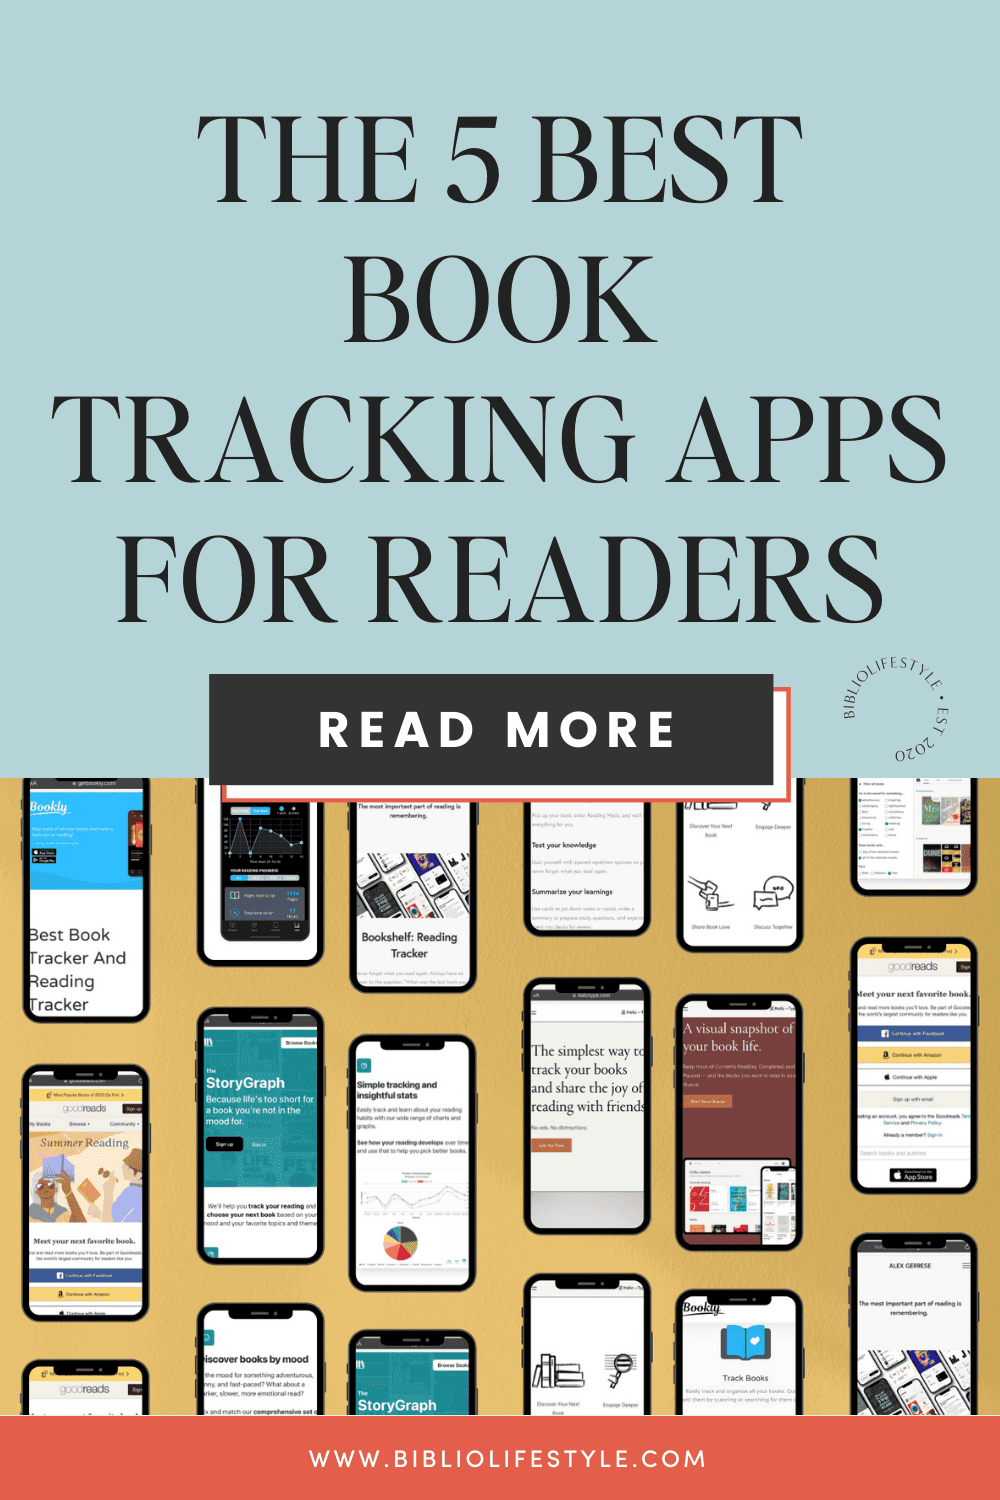 5 Best Book Tracking Apps for Readers